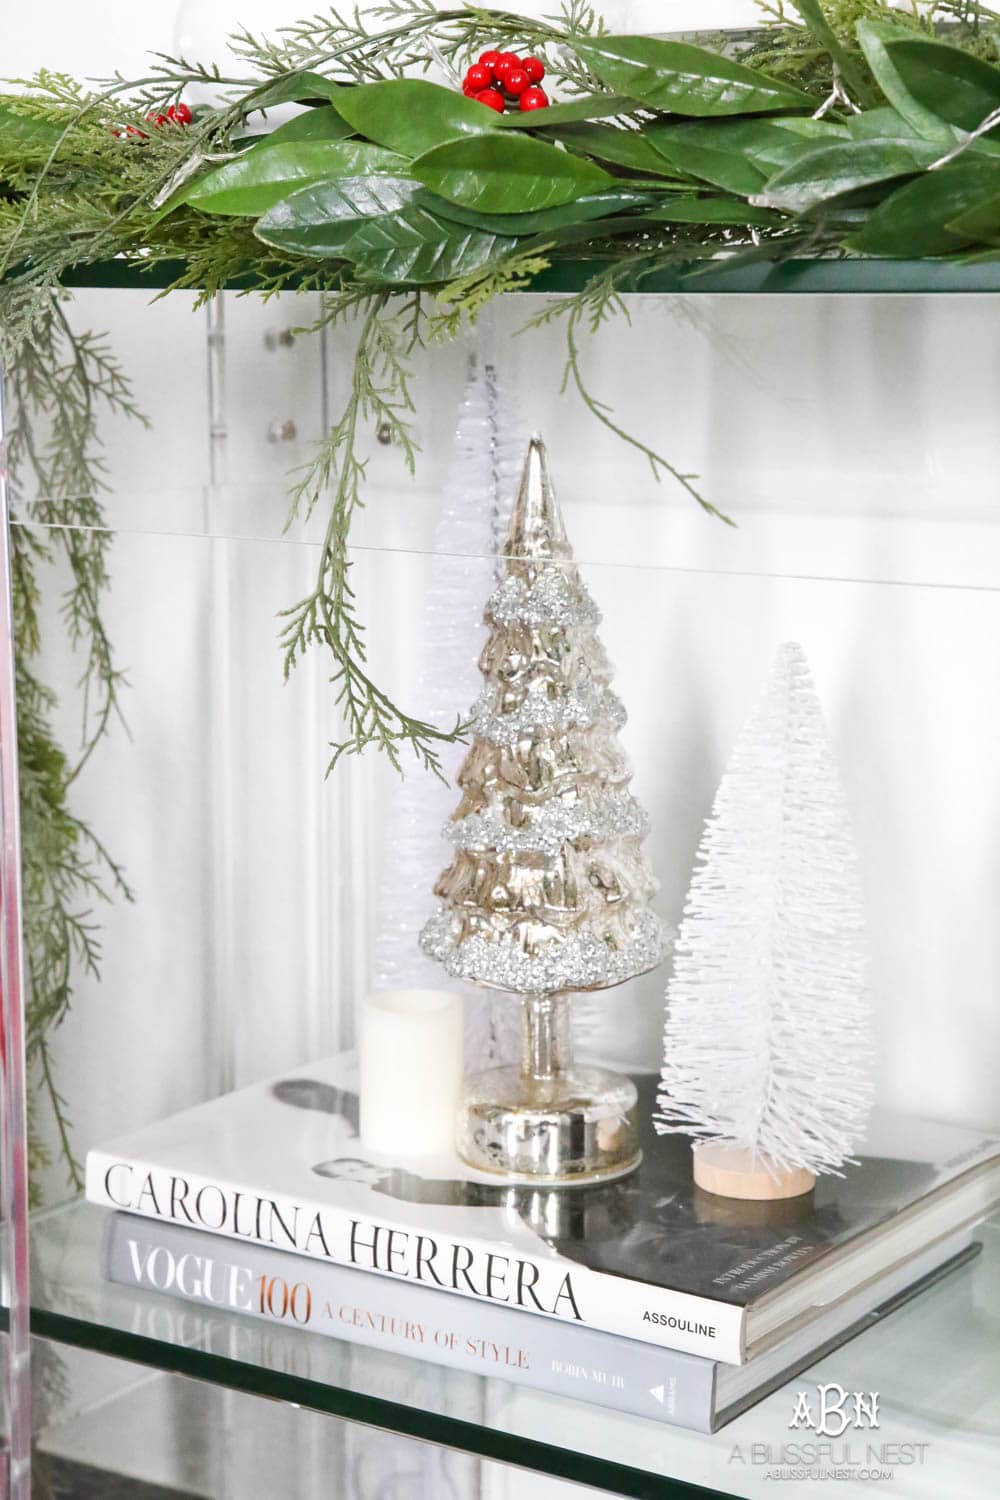 Create a display with your mini trees by clustering them on top of décor books and adding in candles. More ways to add in classic Christmas décor into your home on ablissfulnest.com. #christmasentryway #christmasentry #christmasentrydecor #christmasentrywayideas #christmashometour